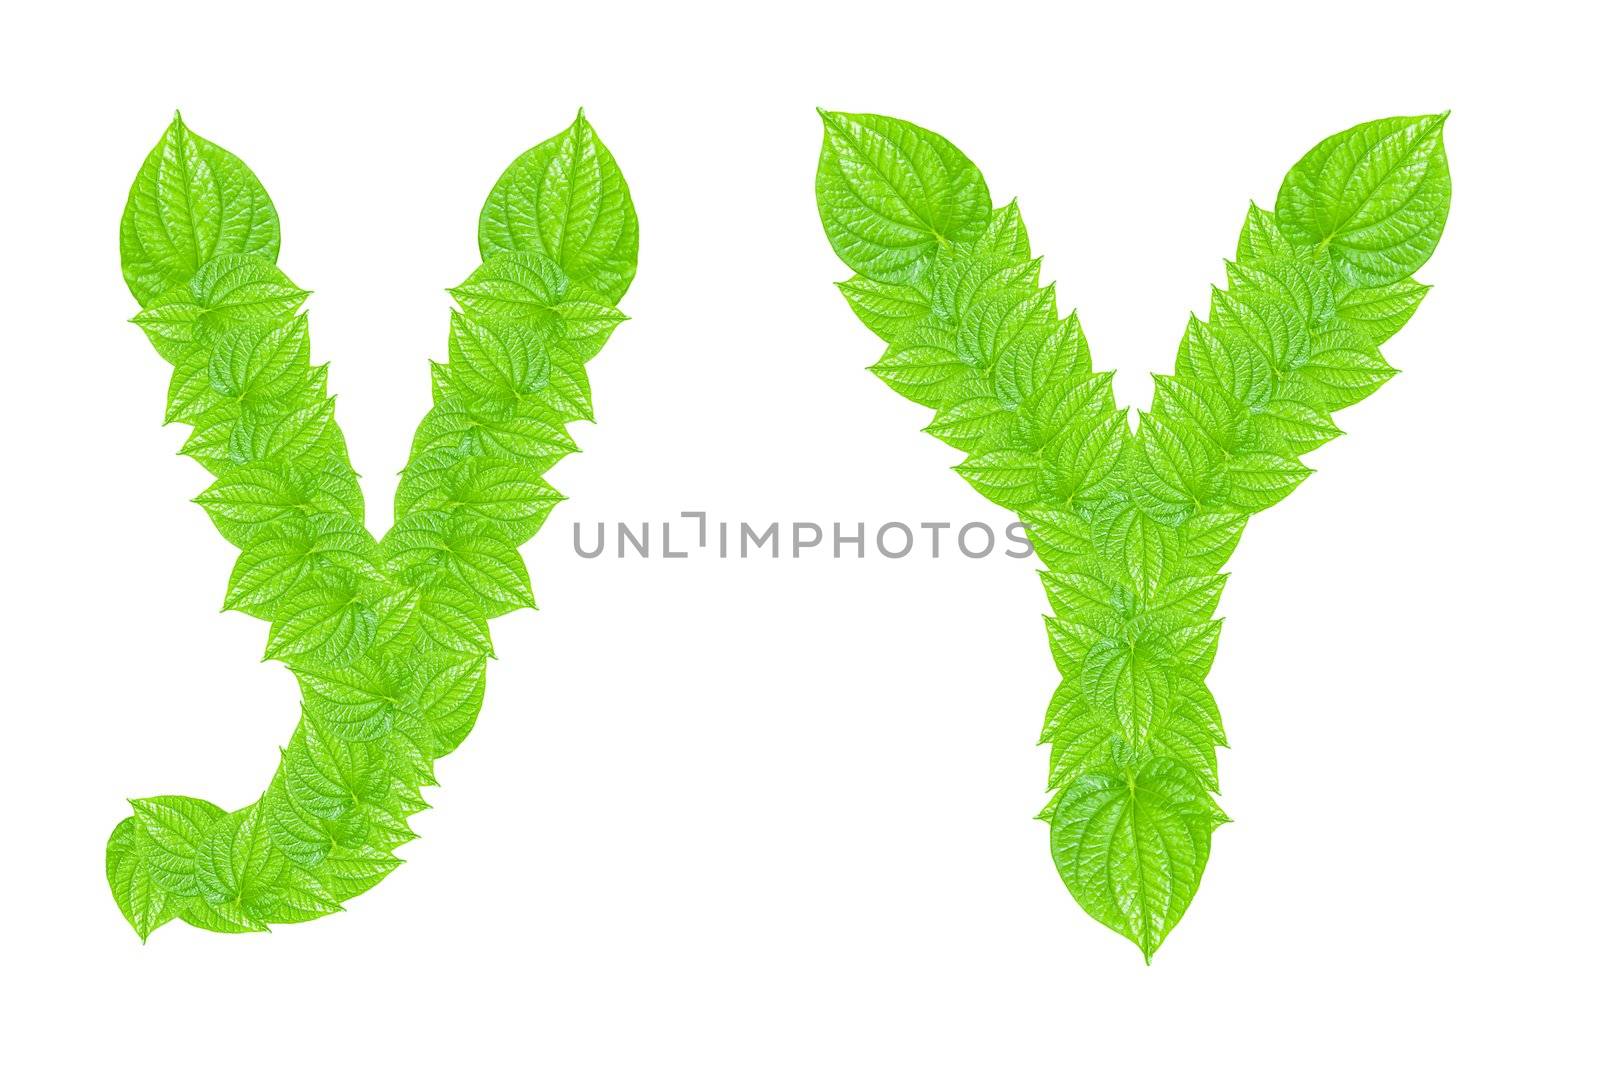 English alphabet made from green leafs by sasilsolutions